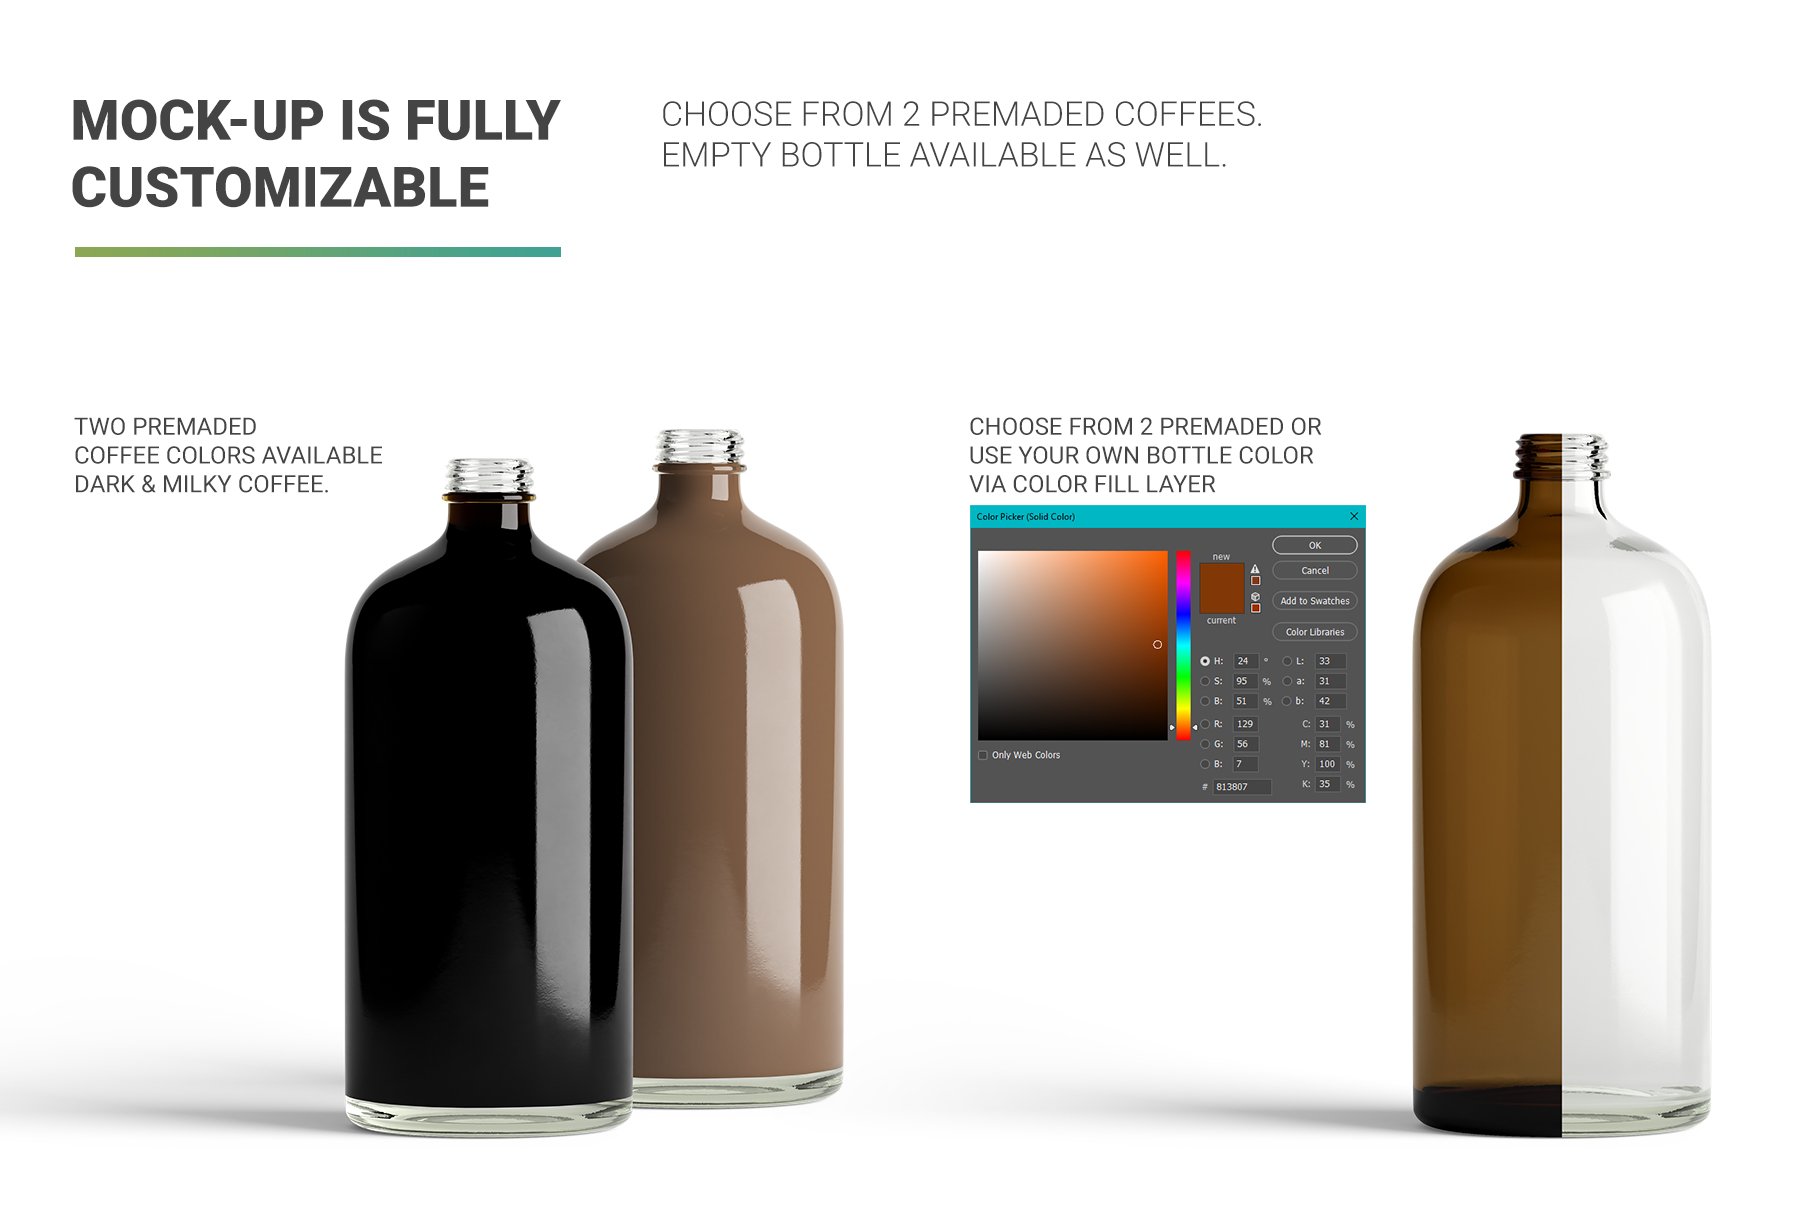 Some coffee bottles features.